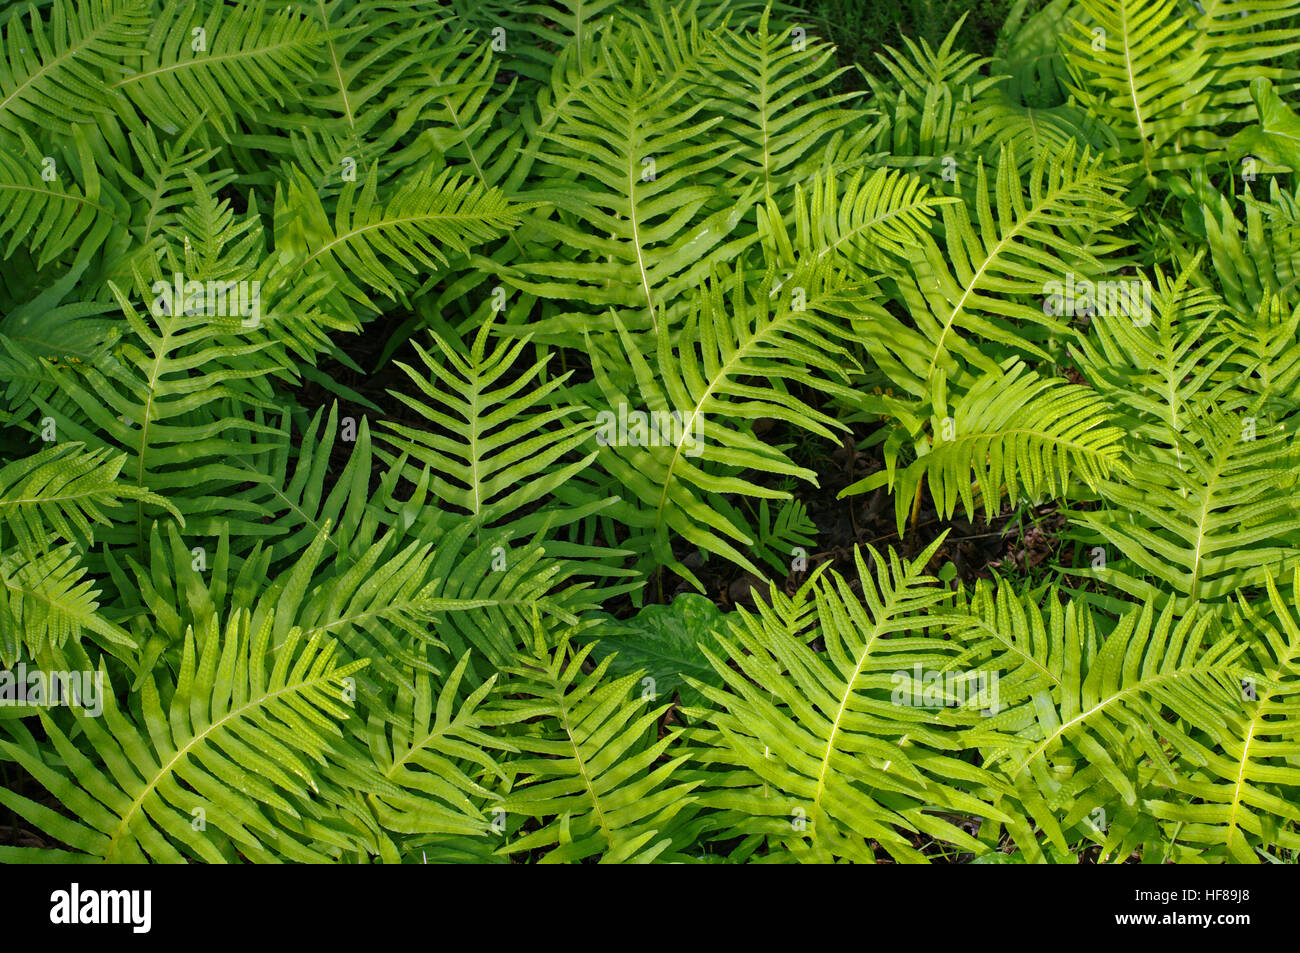 The fern Polypodium cambricum, the Southern polypody, family Polypodiaceae. Stock Photo